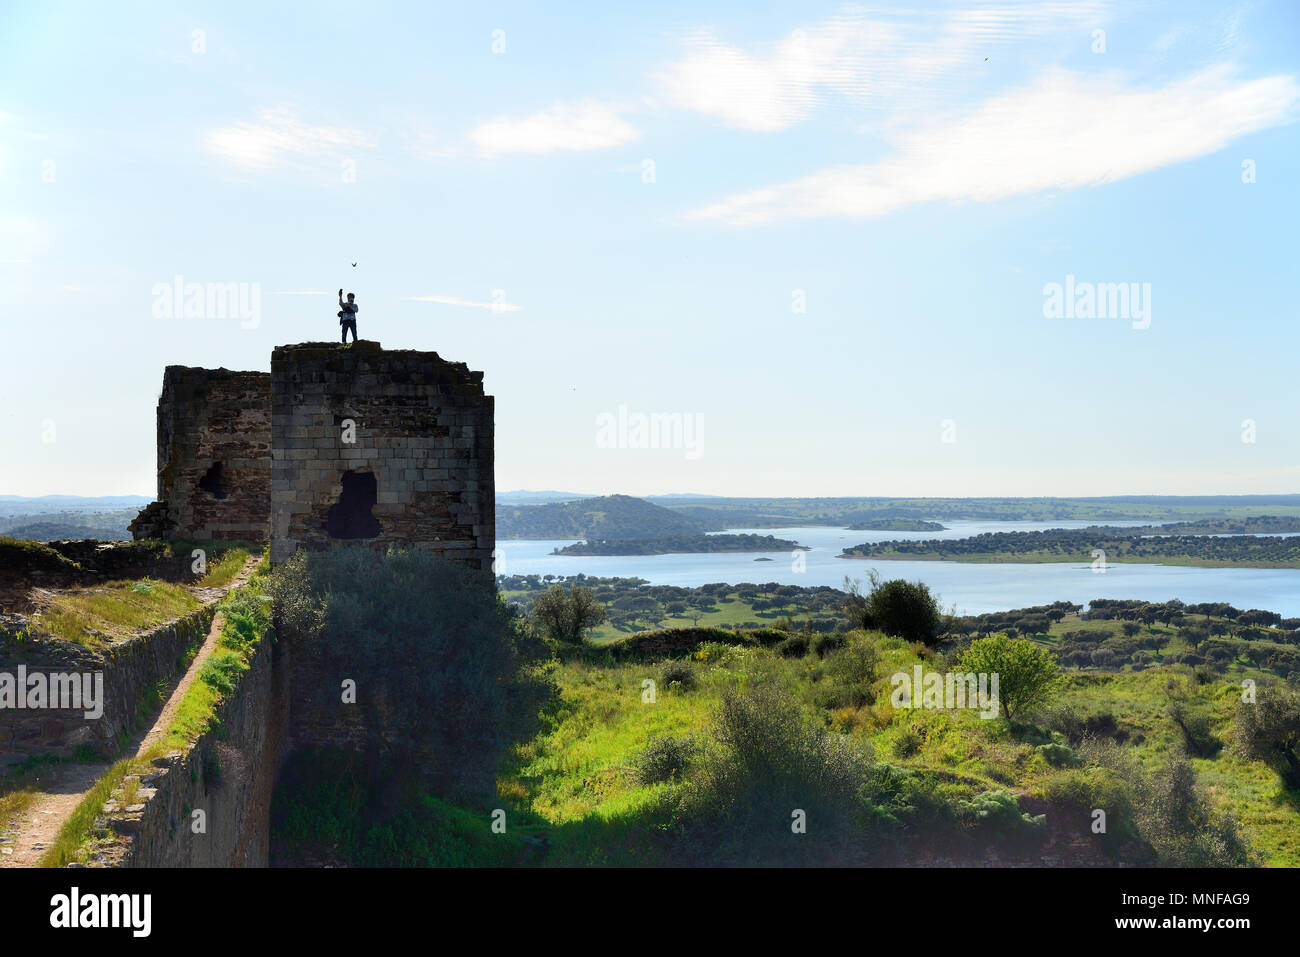 The castle walls of Mourao. In the background the Alqueva dam, the largest artificial lake in Western Europe. Alentejo, Portugal Stock Photo